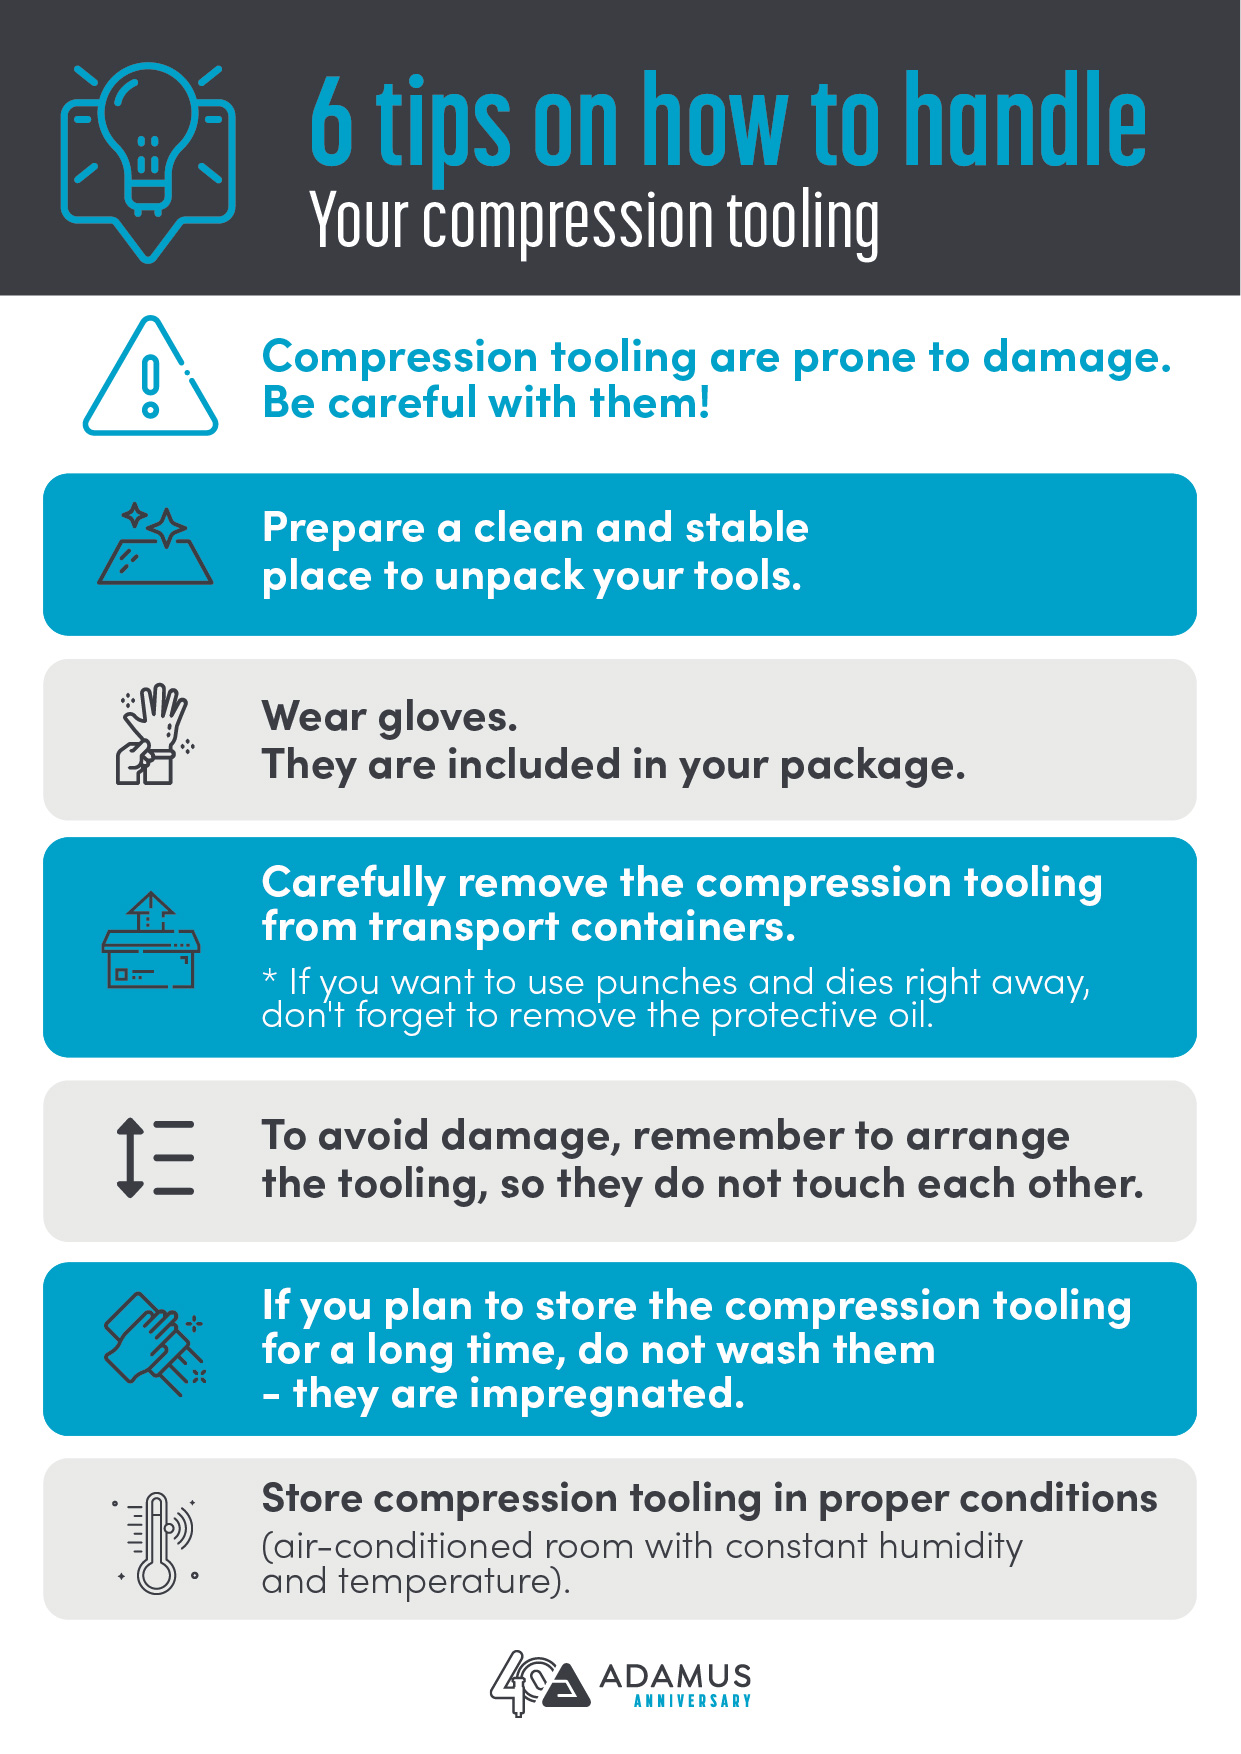 How to handle compression tooling